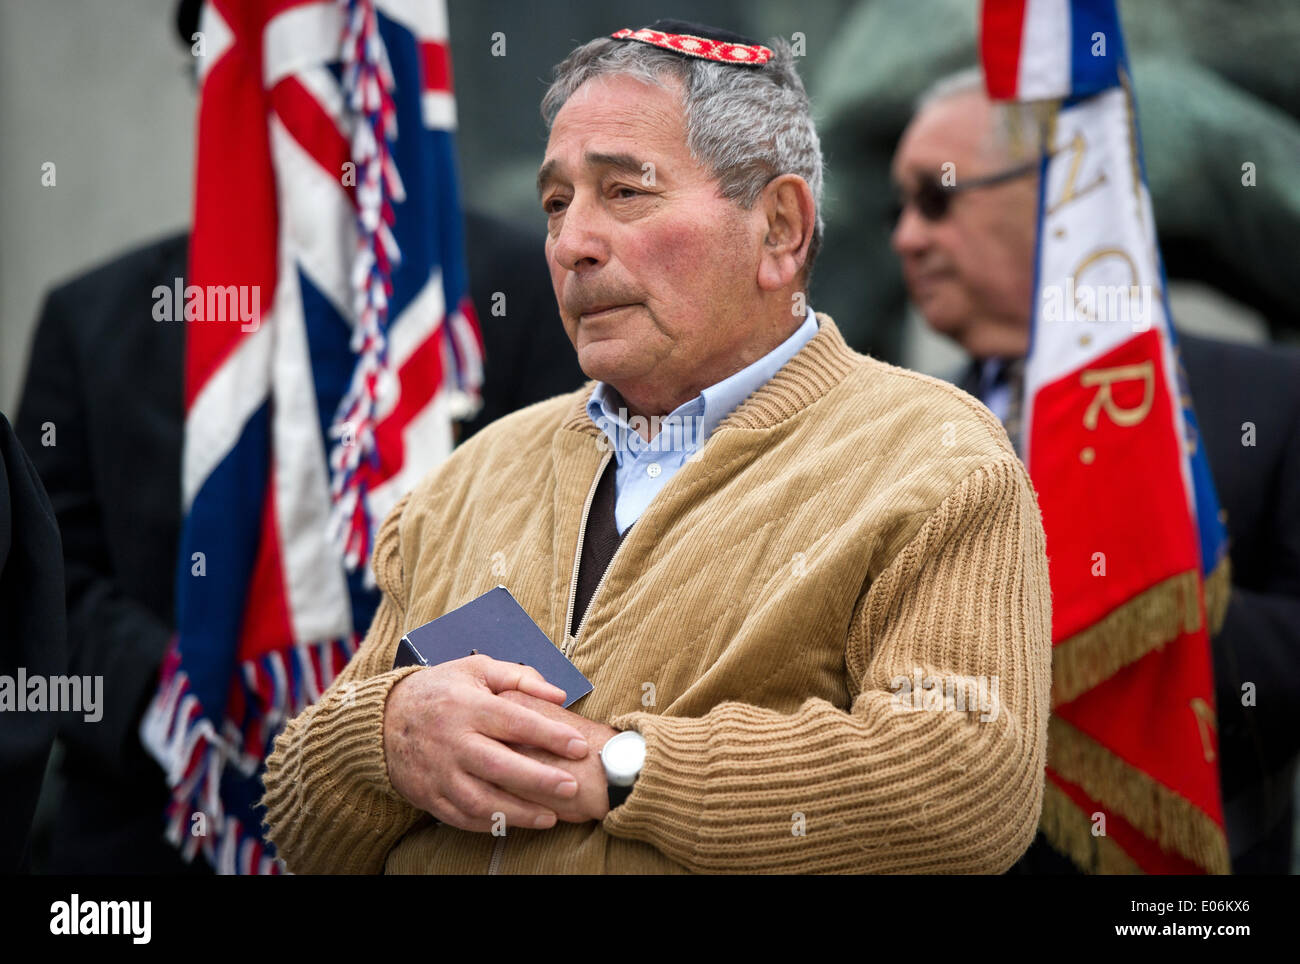 Oranienburg, Germany. 04th May, 2014. Menachem Taub from Israel, Sachsenhausen concentration camp survivor, sits during the ceremony to mark the 69th anniversary of the liberation of Sachsenhausen and Ravensbrueck concentration camps at Station Z in Oranienburg, Germany, 04 May 2014. The pupils want to turn a former prisoner of war camp into a memorial. The 69th anniversary of the liberation is celebrated on 04 May 2014. Photo: DANIEL NAUPOLD/dpa/Alamy Live News Stock Photo